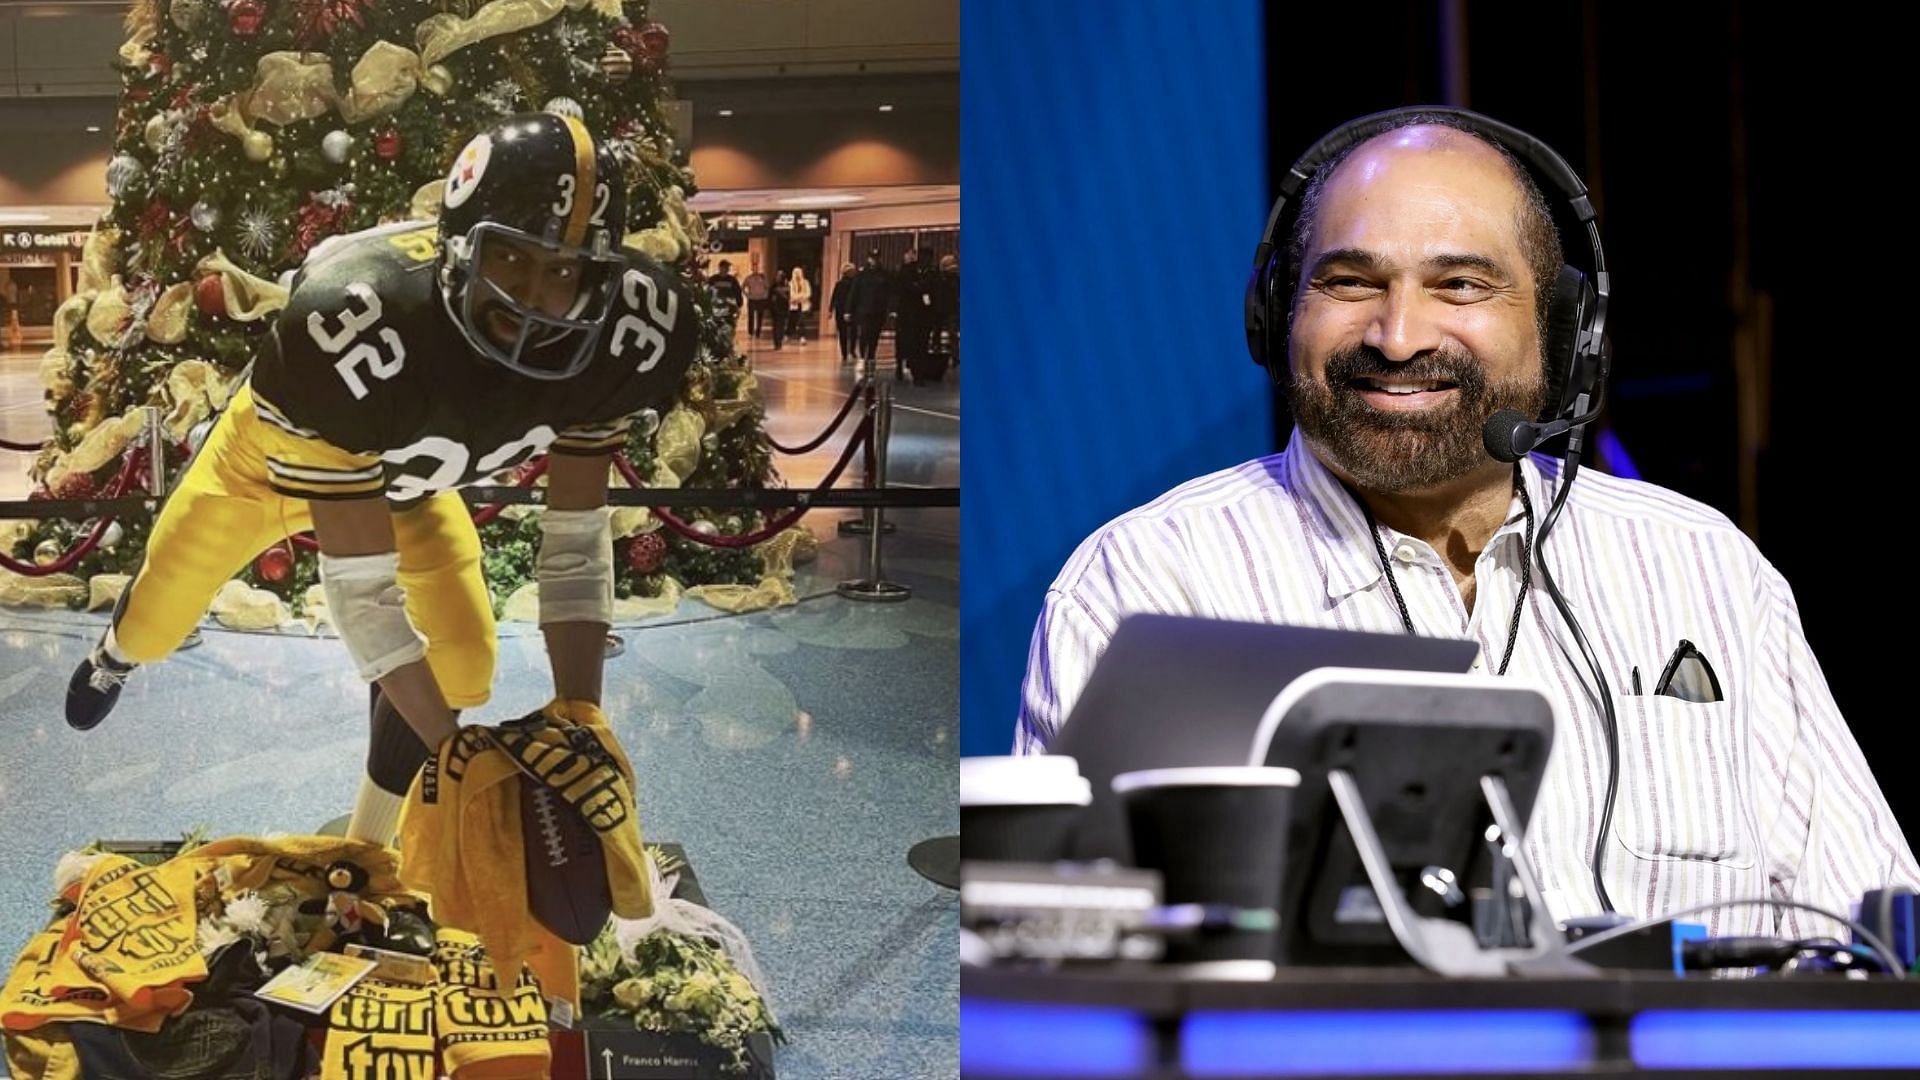 Why was the Franco Harris statue moved?